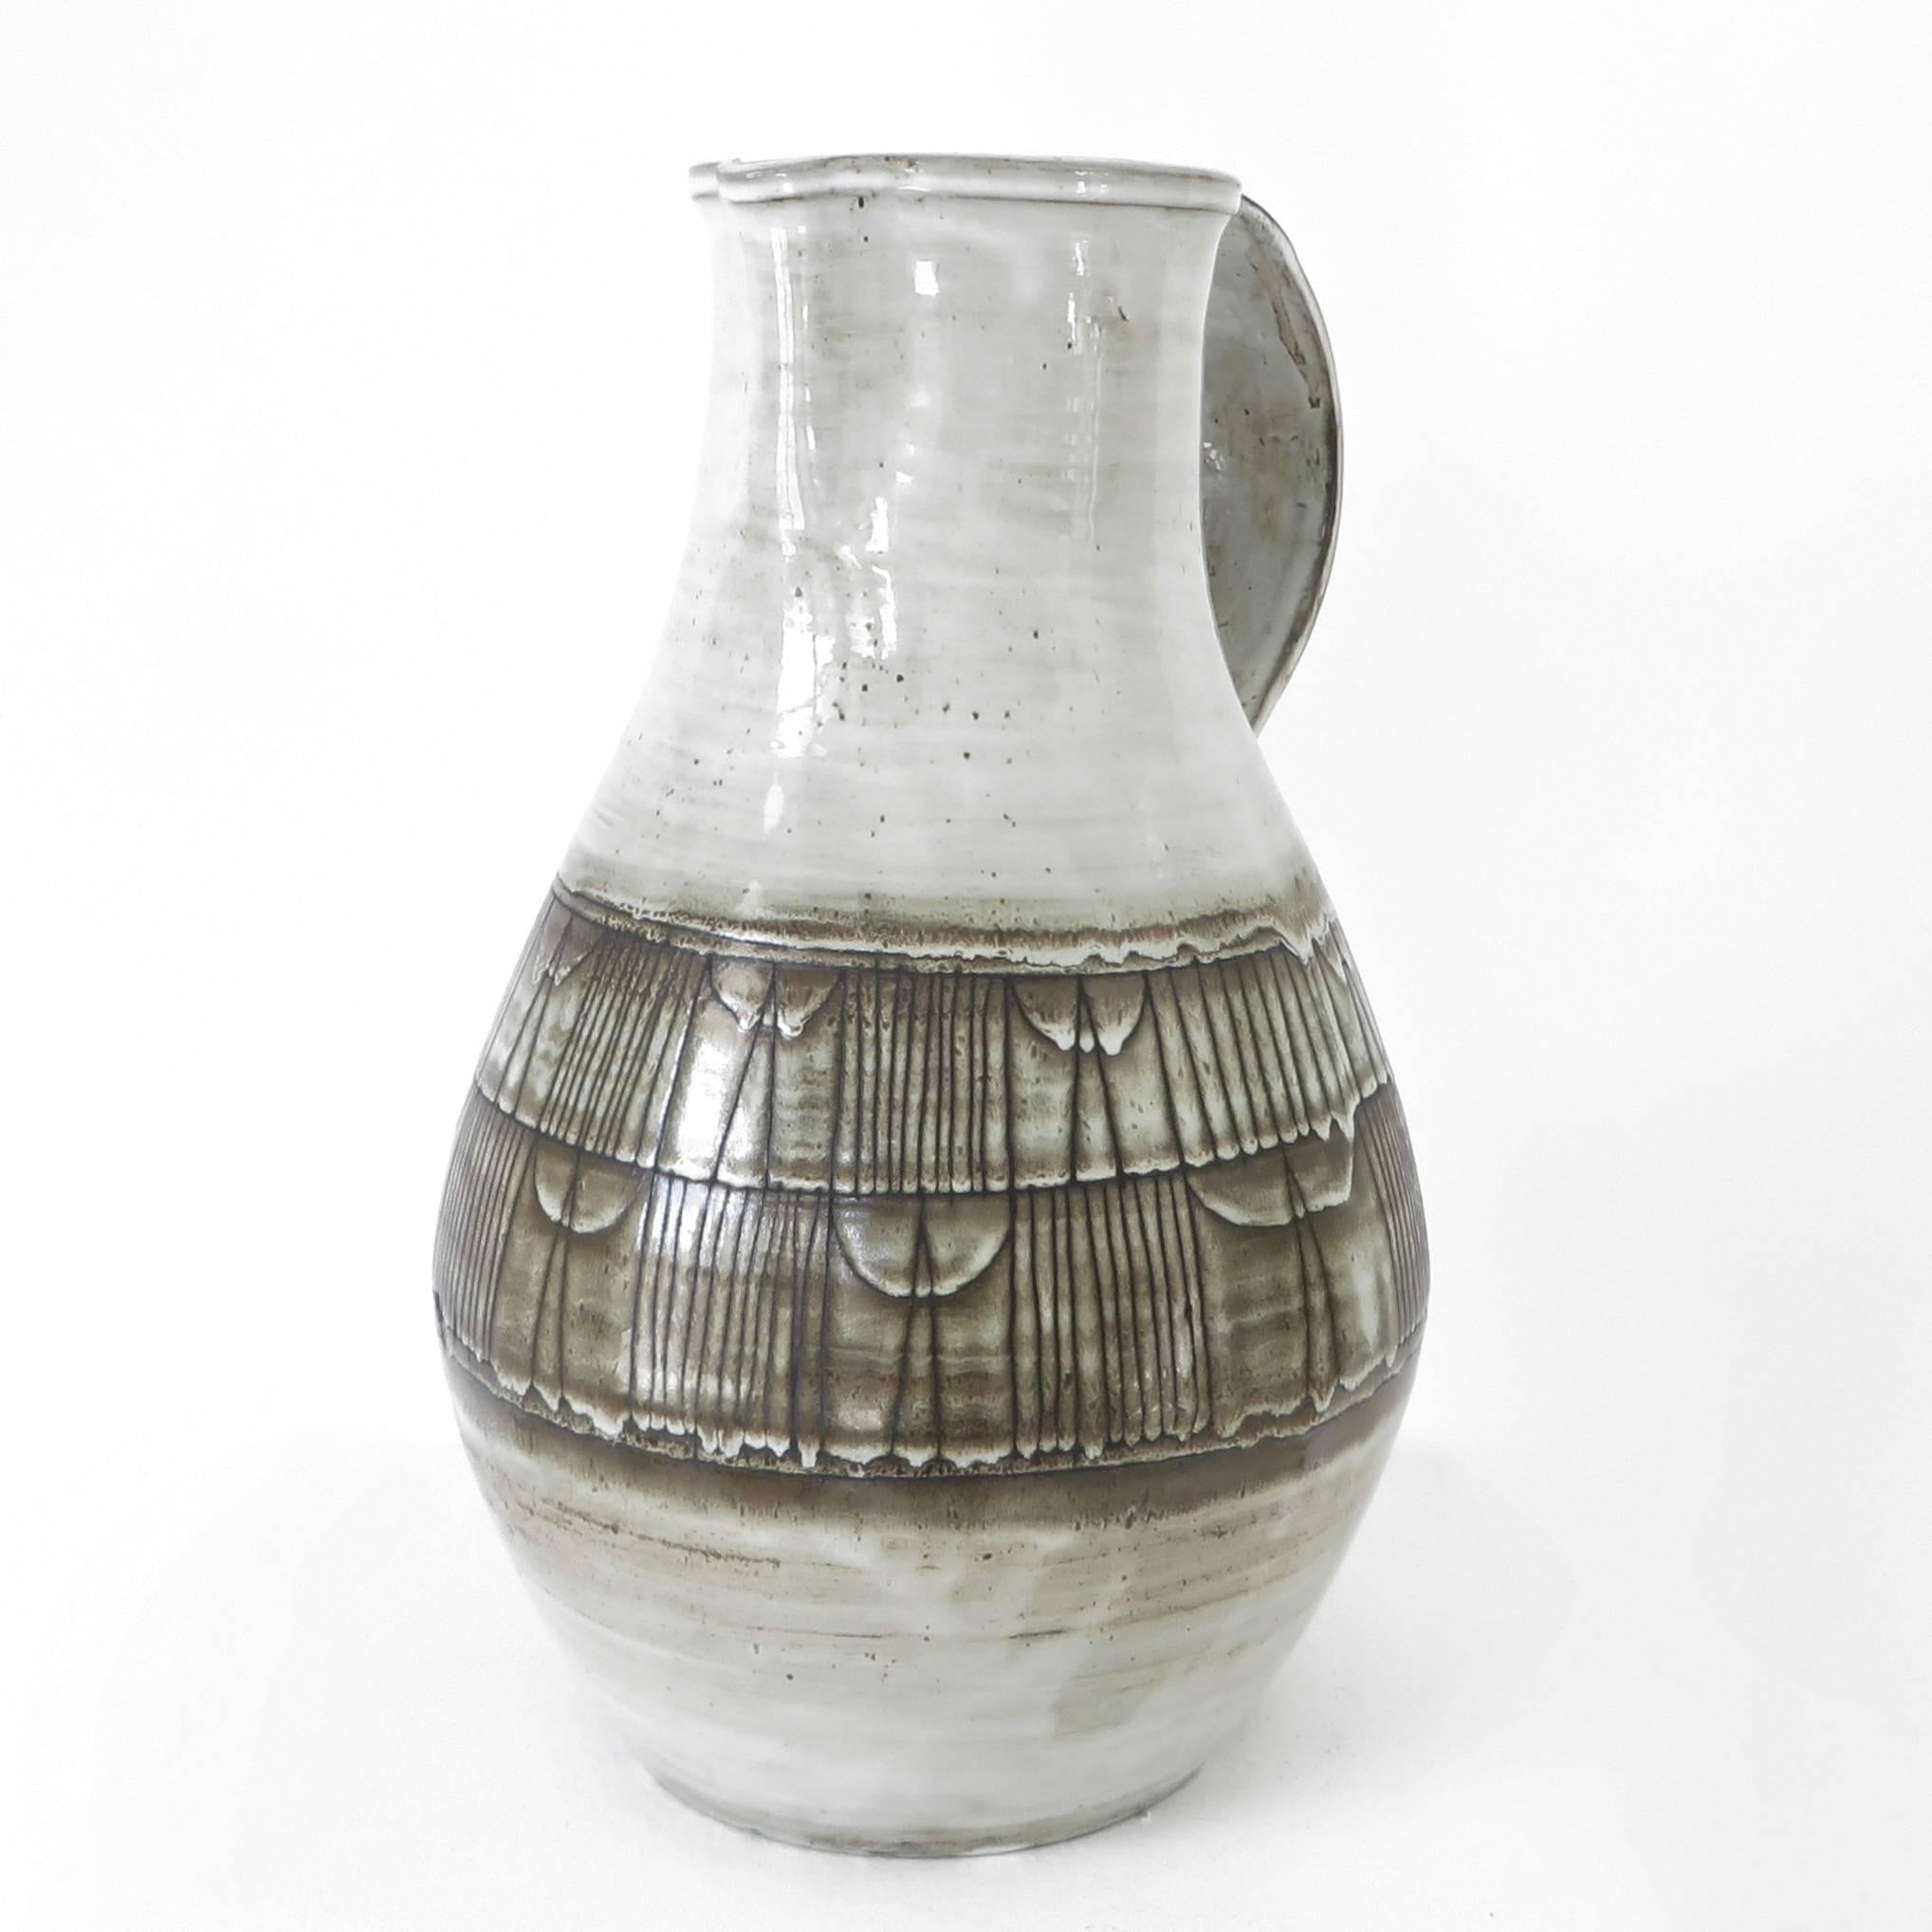 Monumental French Ceramic Pitcher by Jaques Pouchain Atelier Dieulefit 1